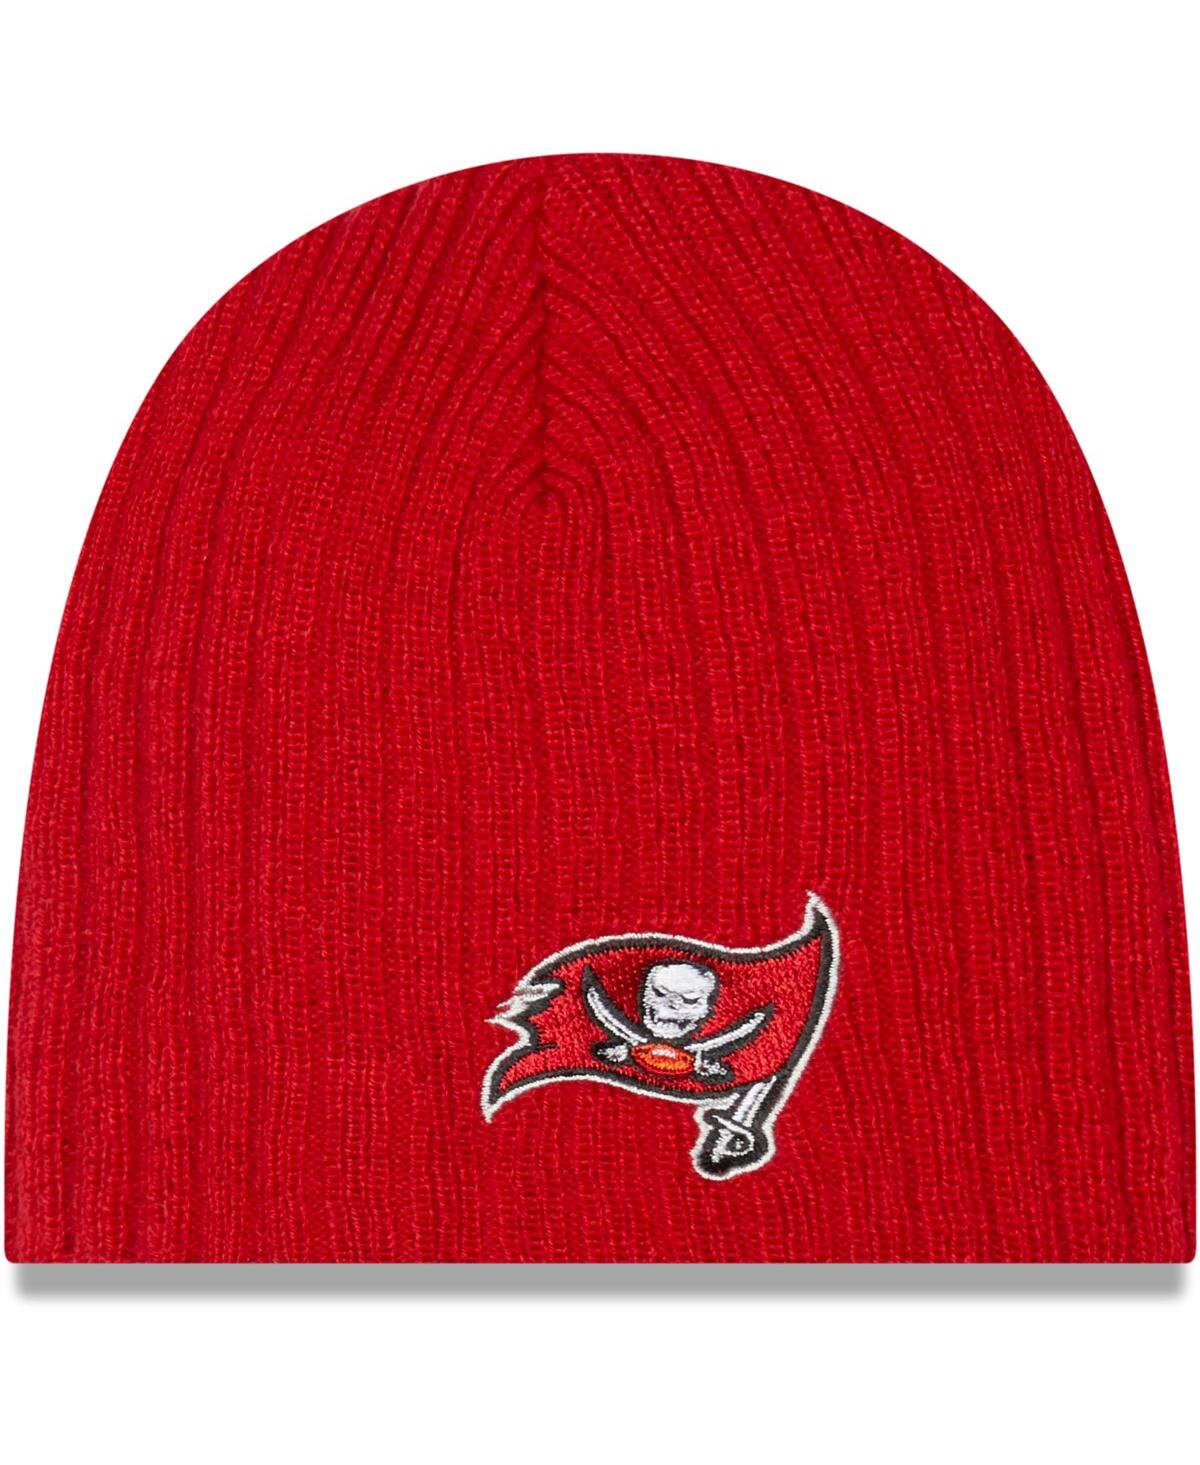 New Era Babies' Infant Boys And Girls Red Tampa Bay Buccaneers Mini Fan Beanie